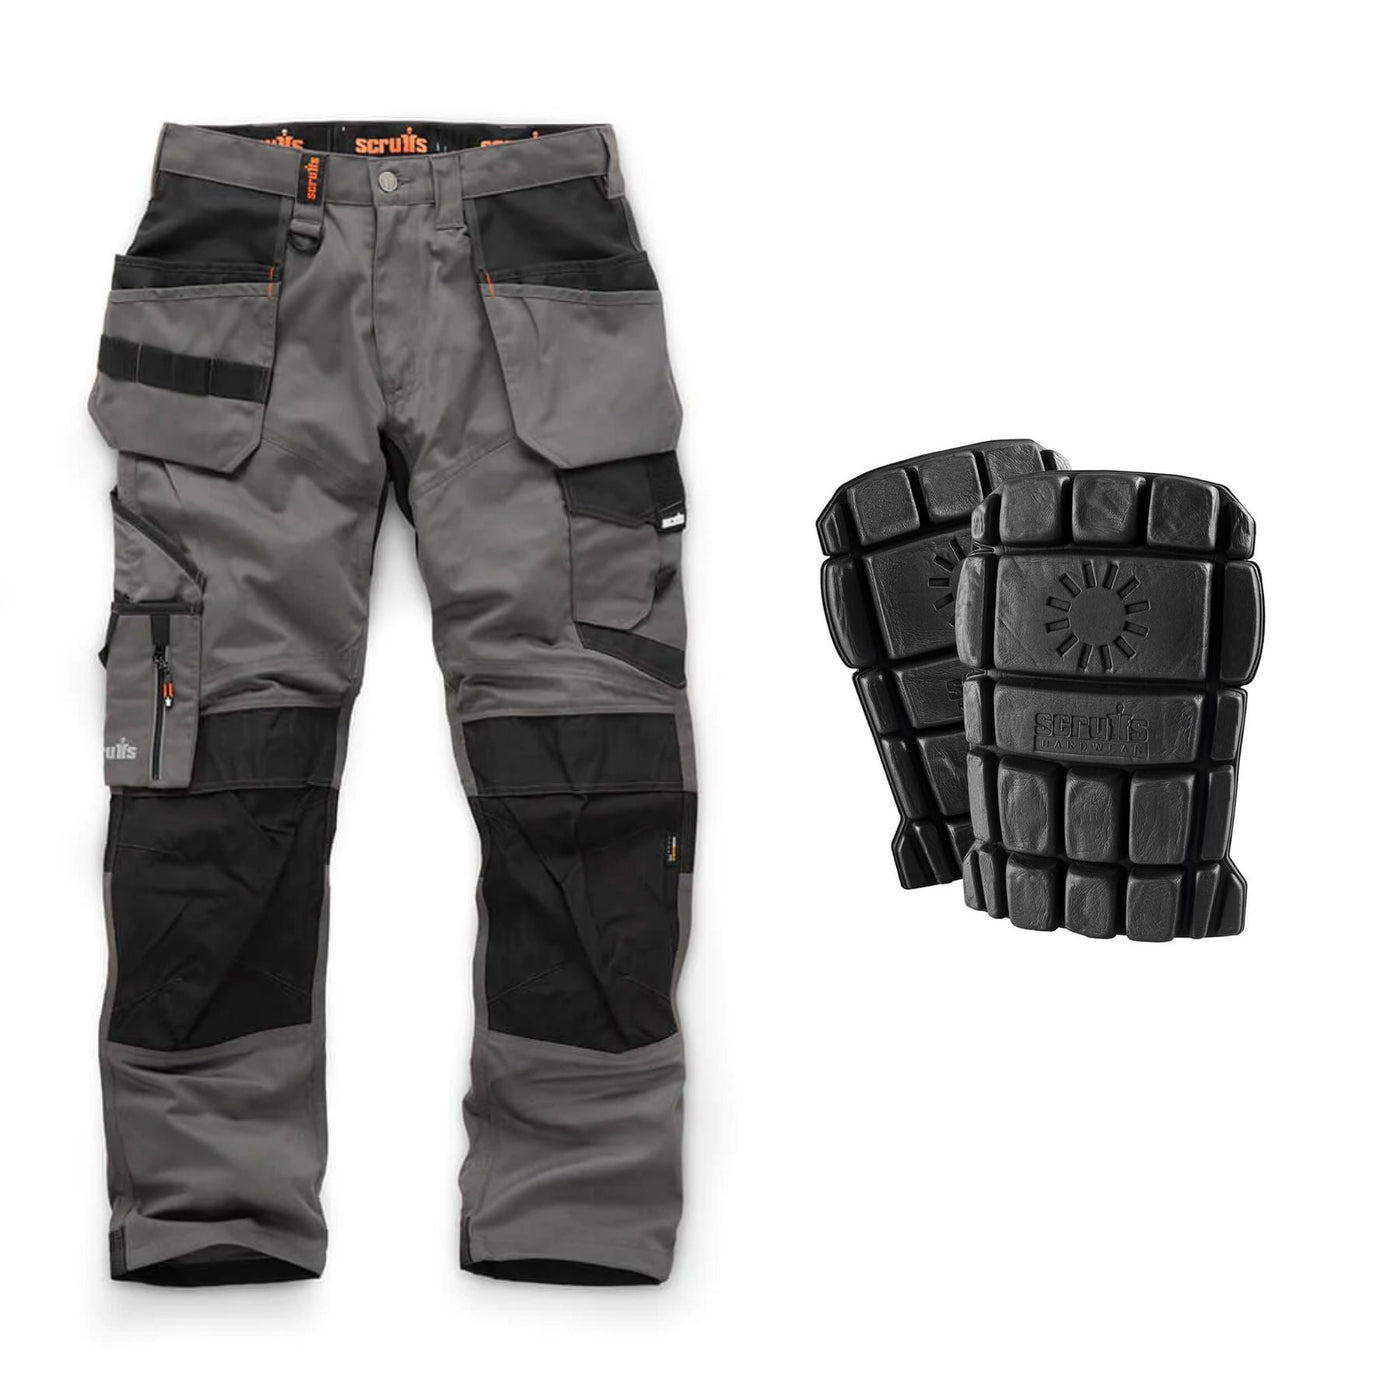 Scruffs Special Offer Pack - Trade Holster Pocket Work Trousers + Knee Pads